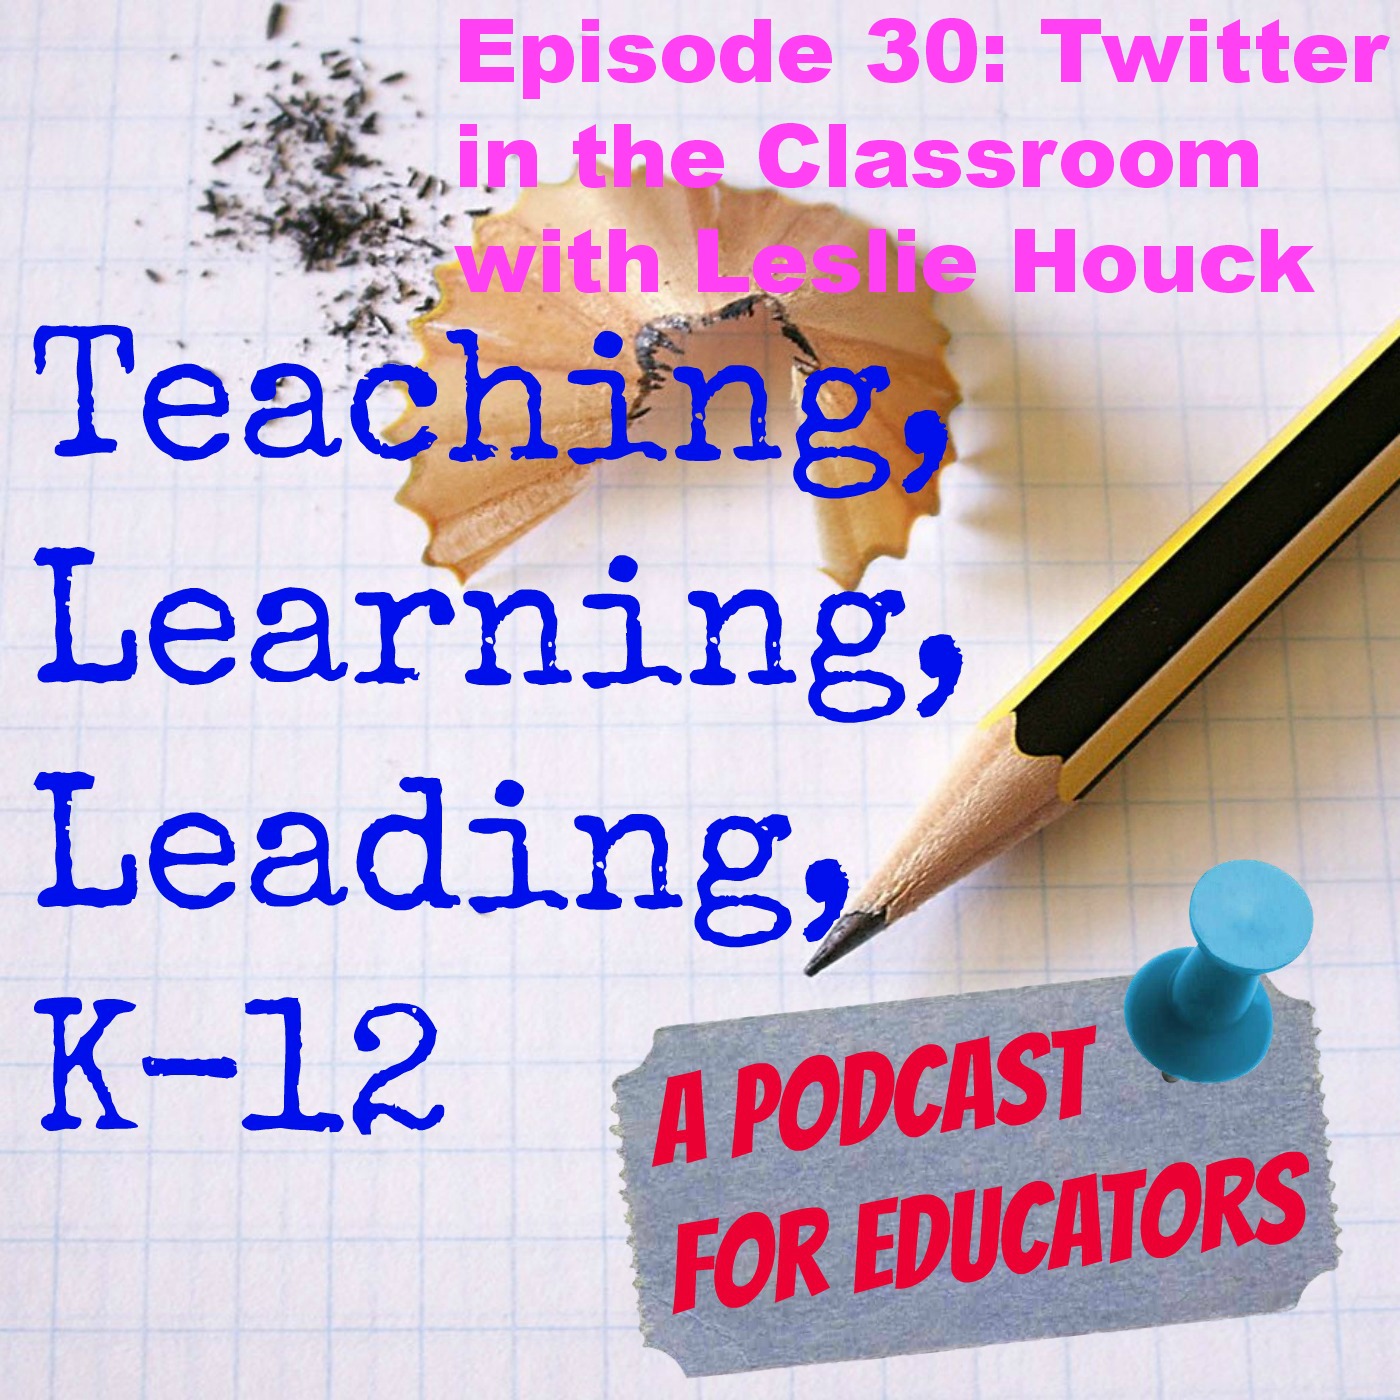 Episode 30: Twitter in the Classroom with Leslie Houck